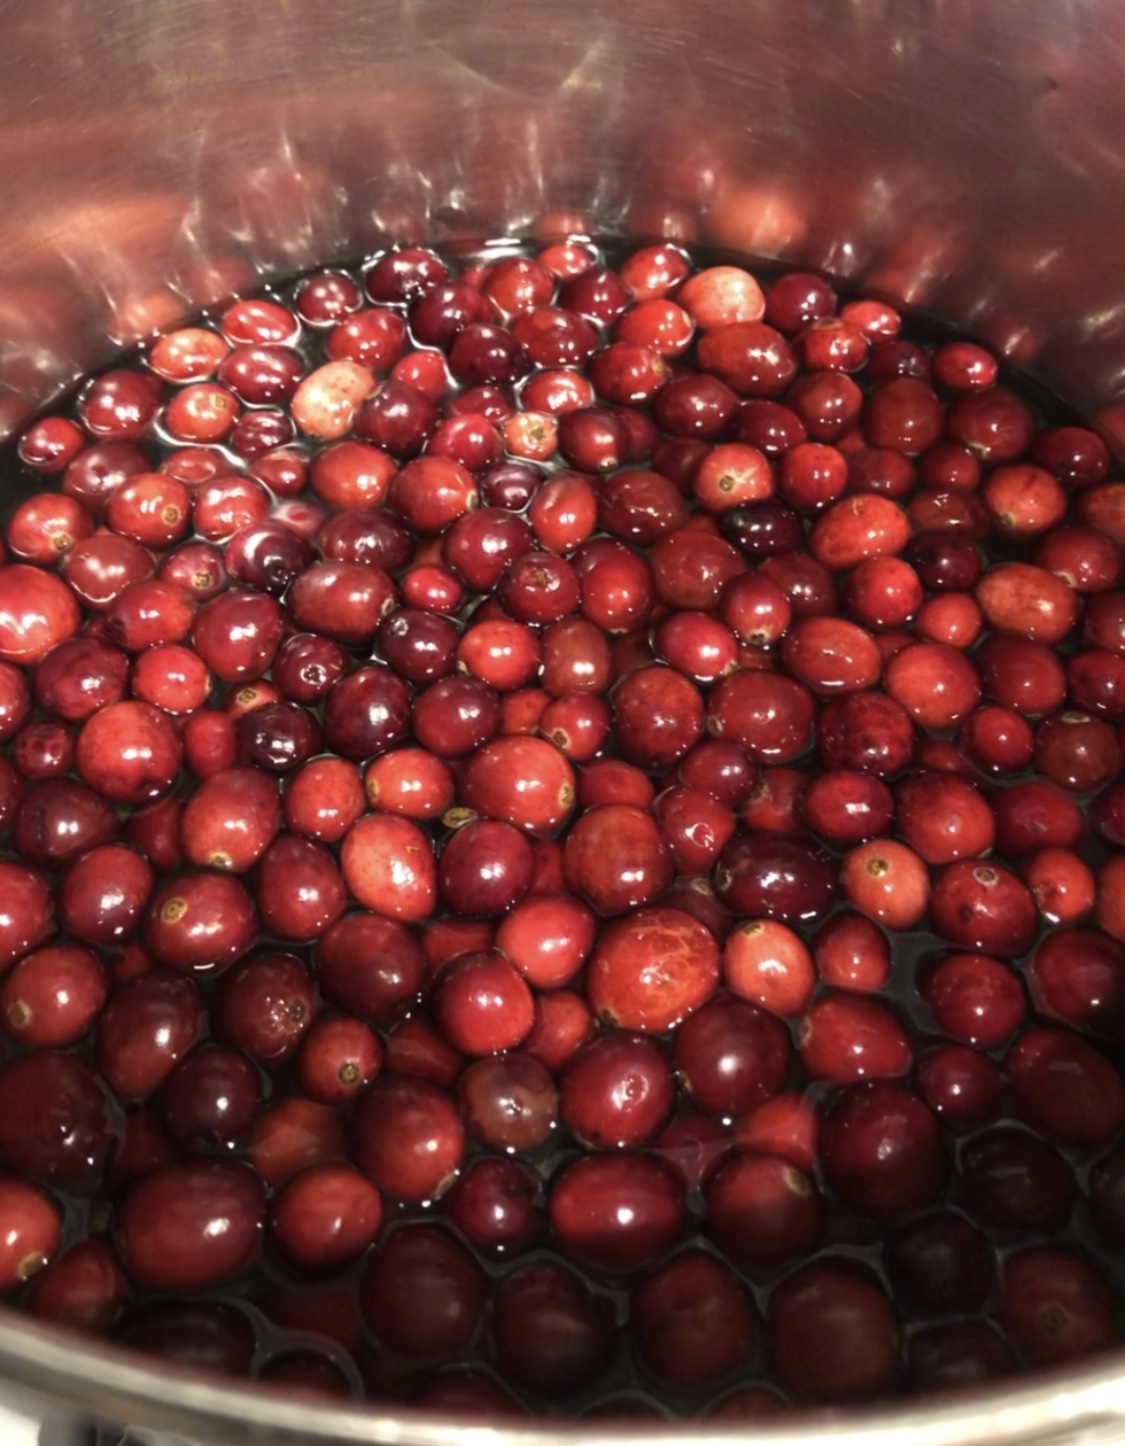 Organic cranberries and water